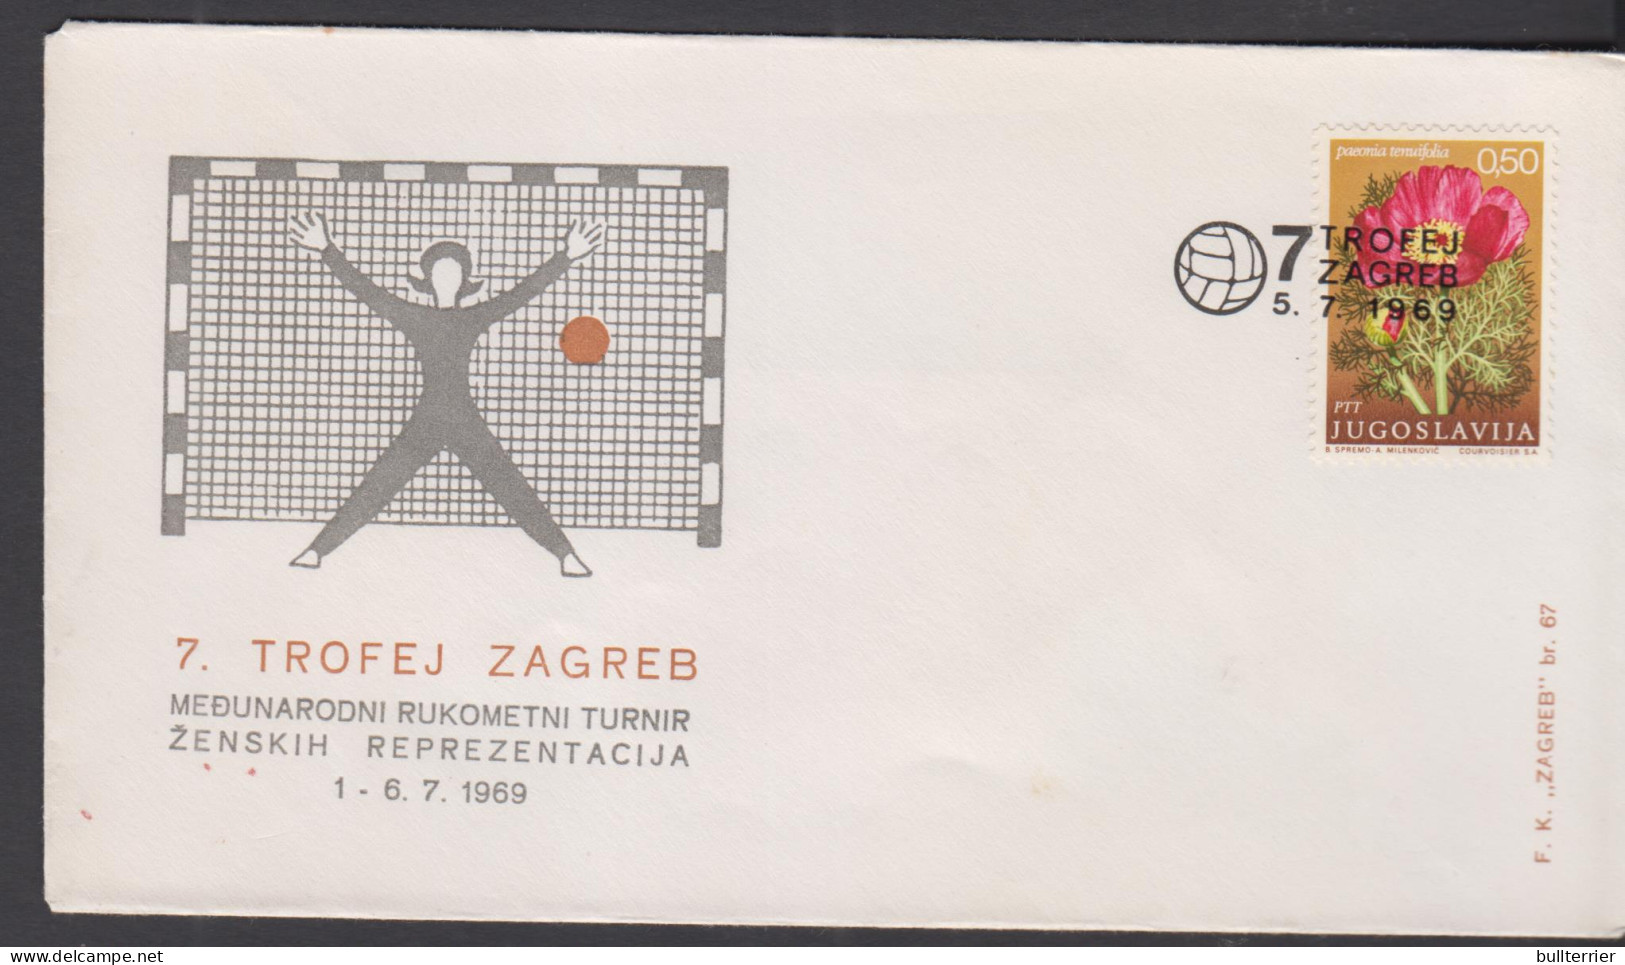 SPORTS - YUGOSLAVIA - 1969 -HANDBALL TOURNAMENT ILLUSTRATED  COVER WITH SPECIAL POSTMARKS - Balonmano